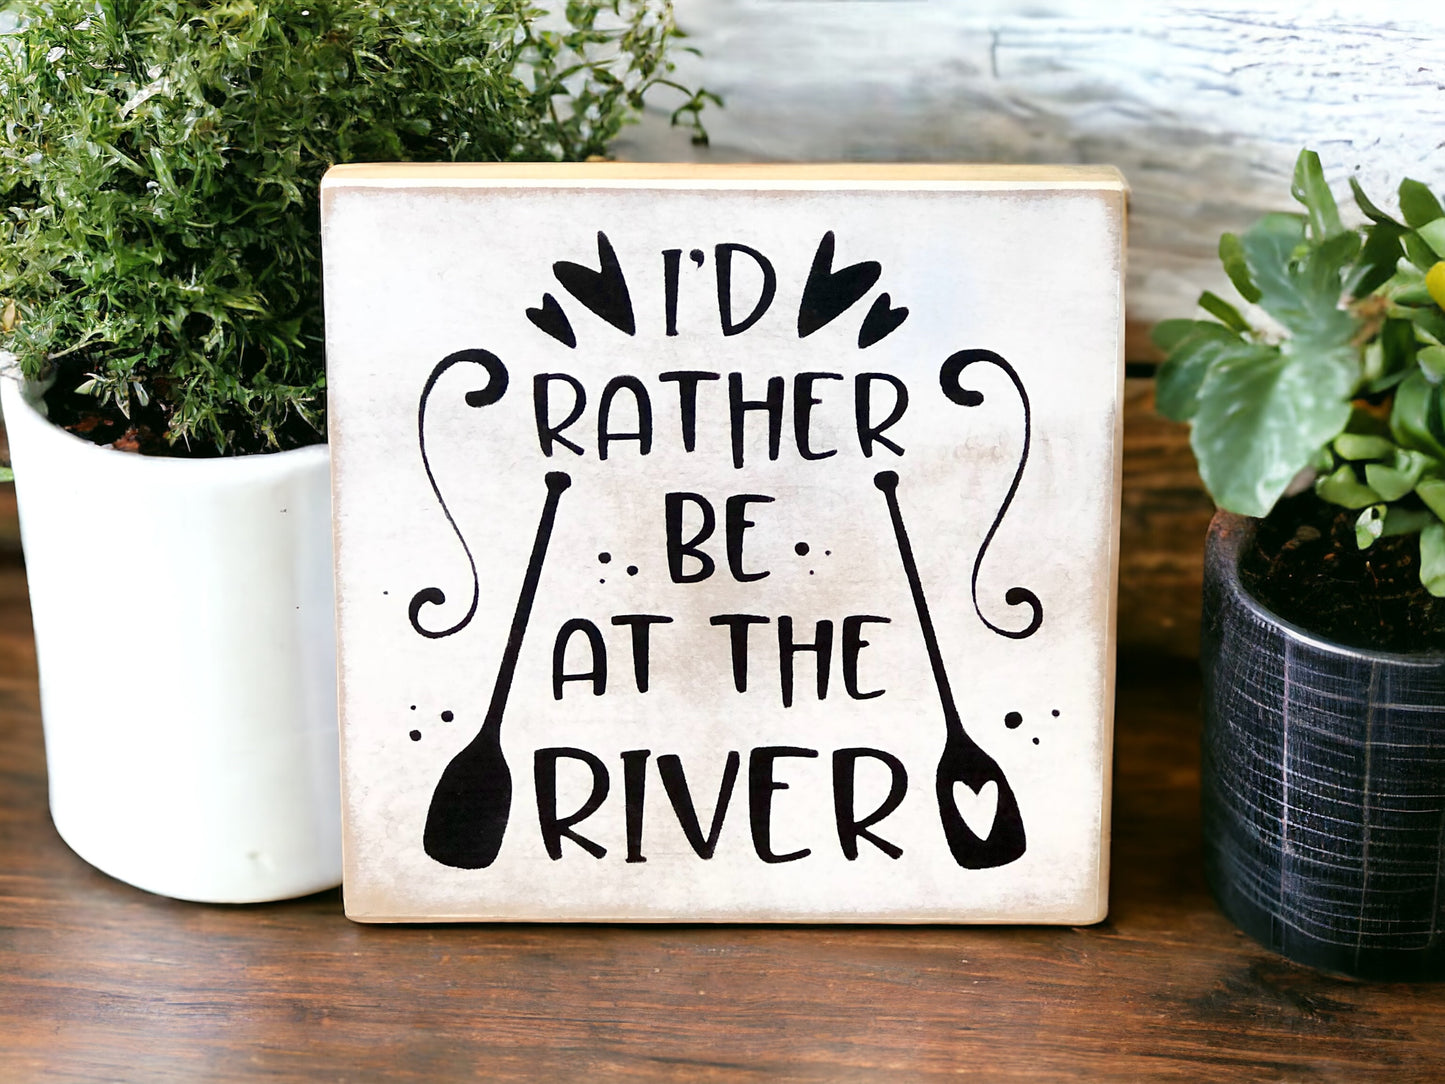 Rather be at the River - Rustic Wood Shelf Sitter